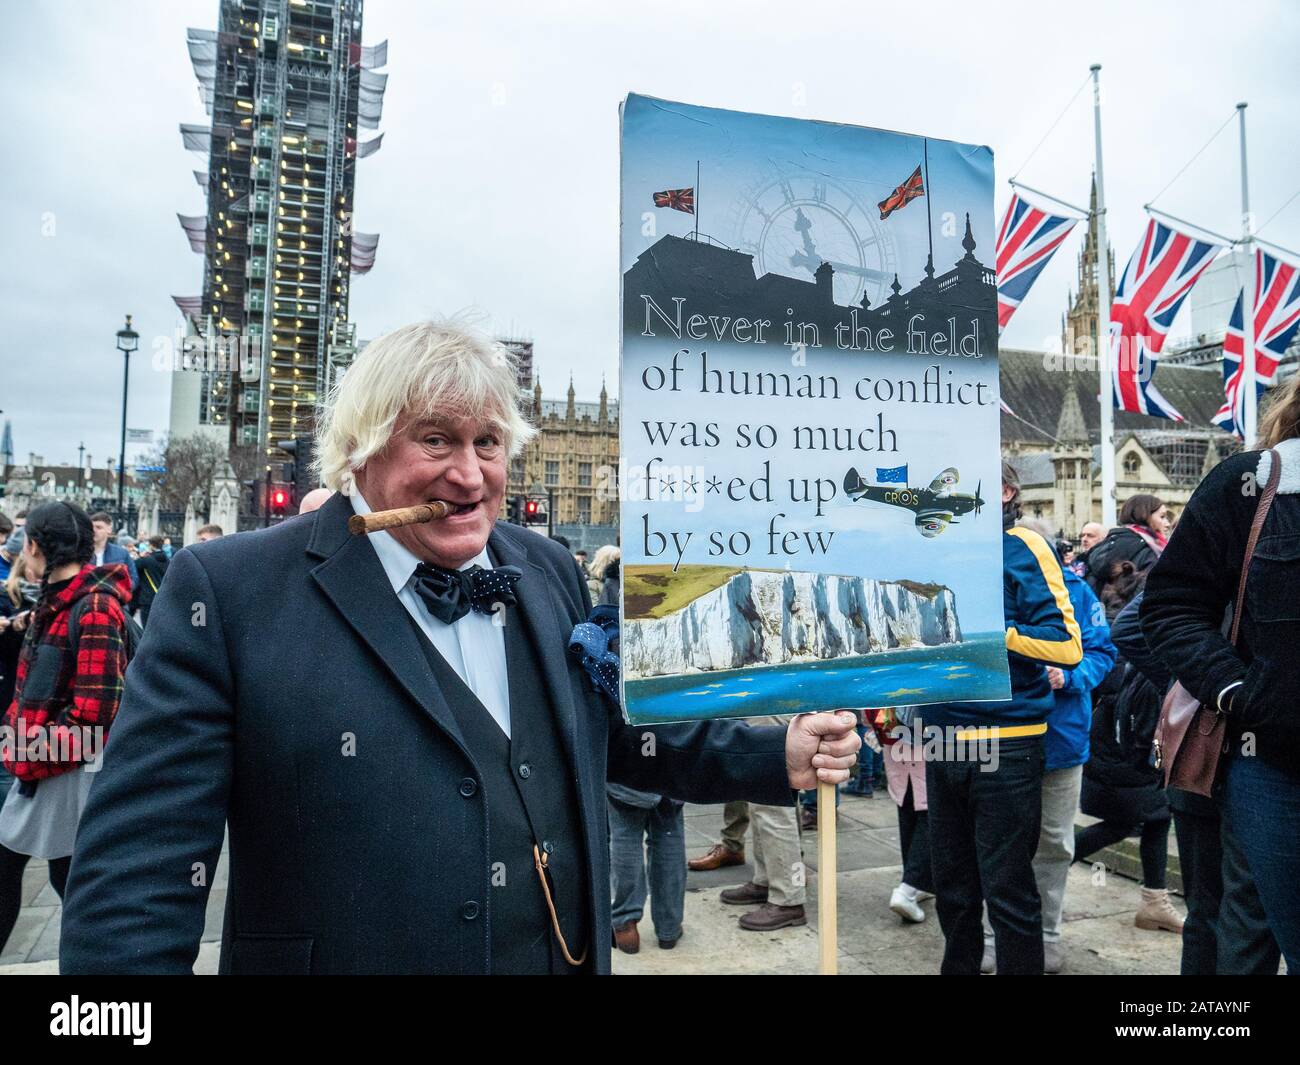 Brexit day 31st Jan 2020 in Parliament square, London, England, as a man stands with a humourous placard referring to a Churchil speach. Stock Photo